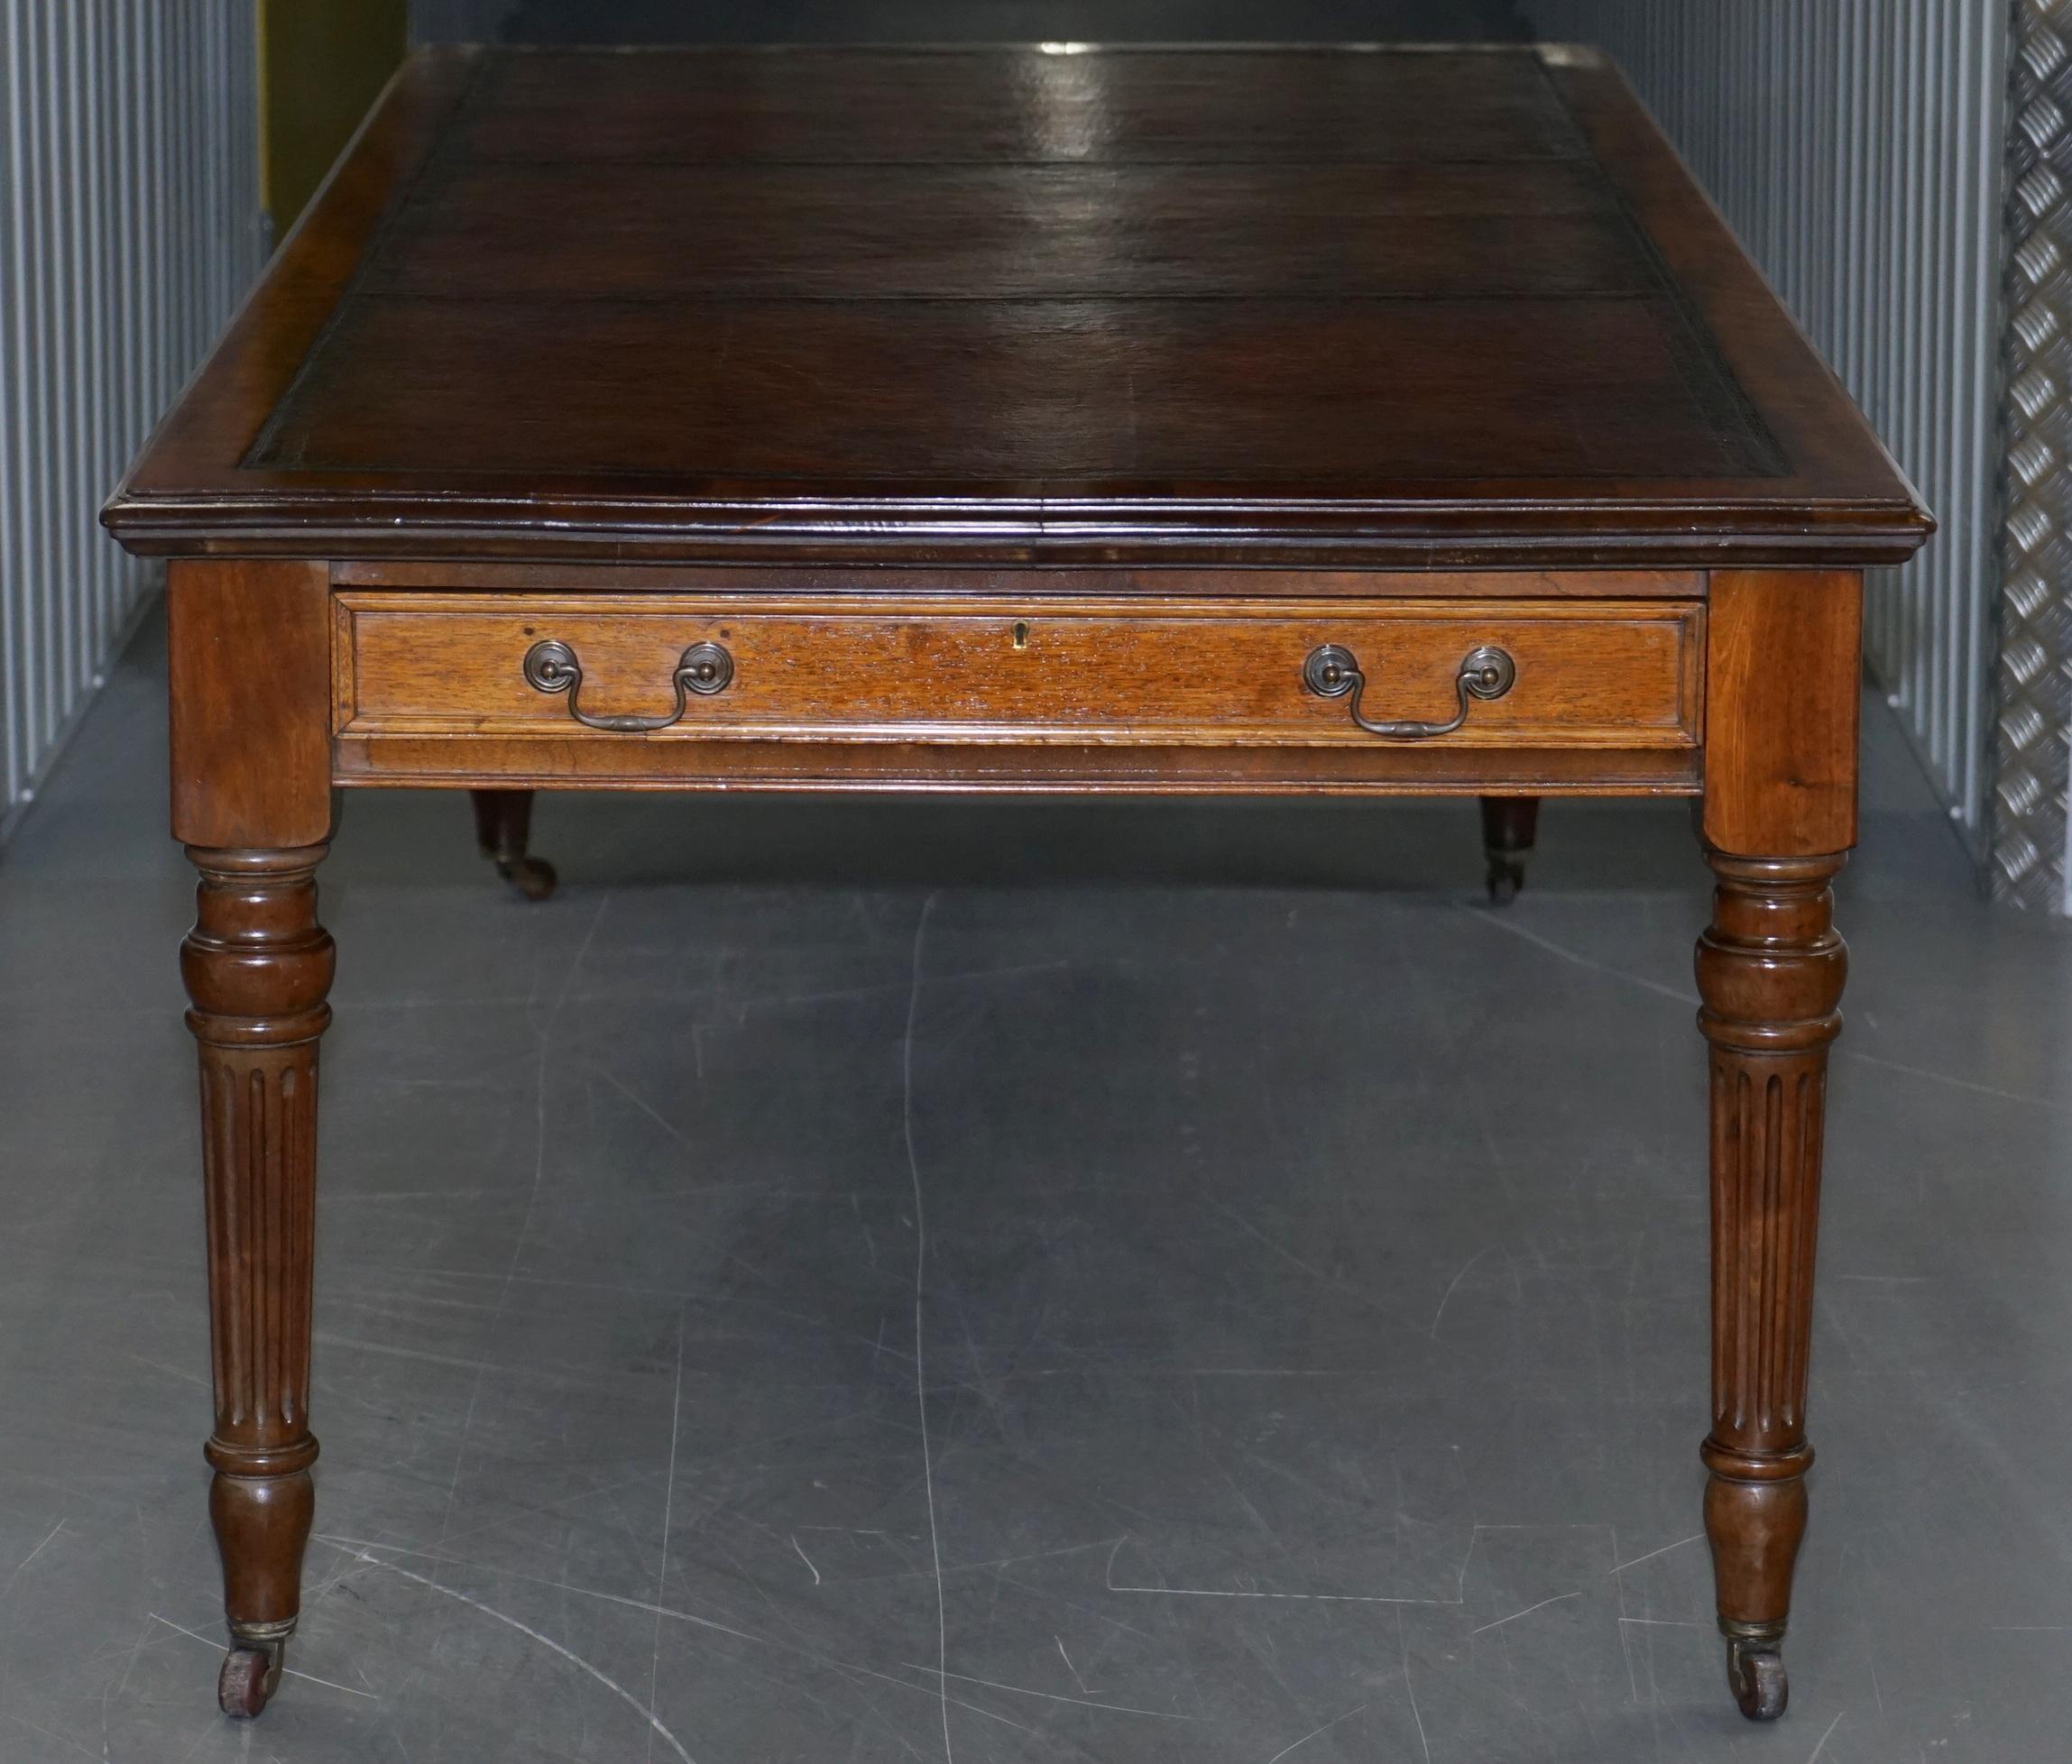 Huge Restored Victorian Refectory Library Dining Table Brown Leather Top Gillows 5